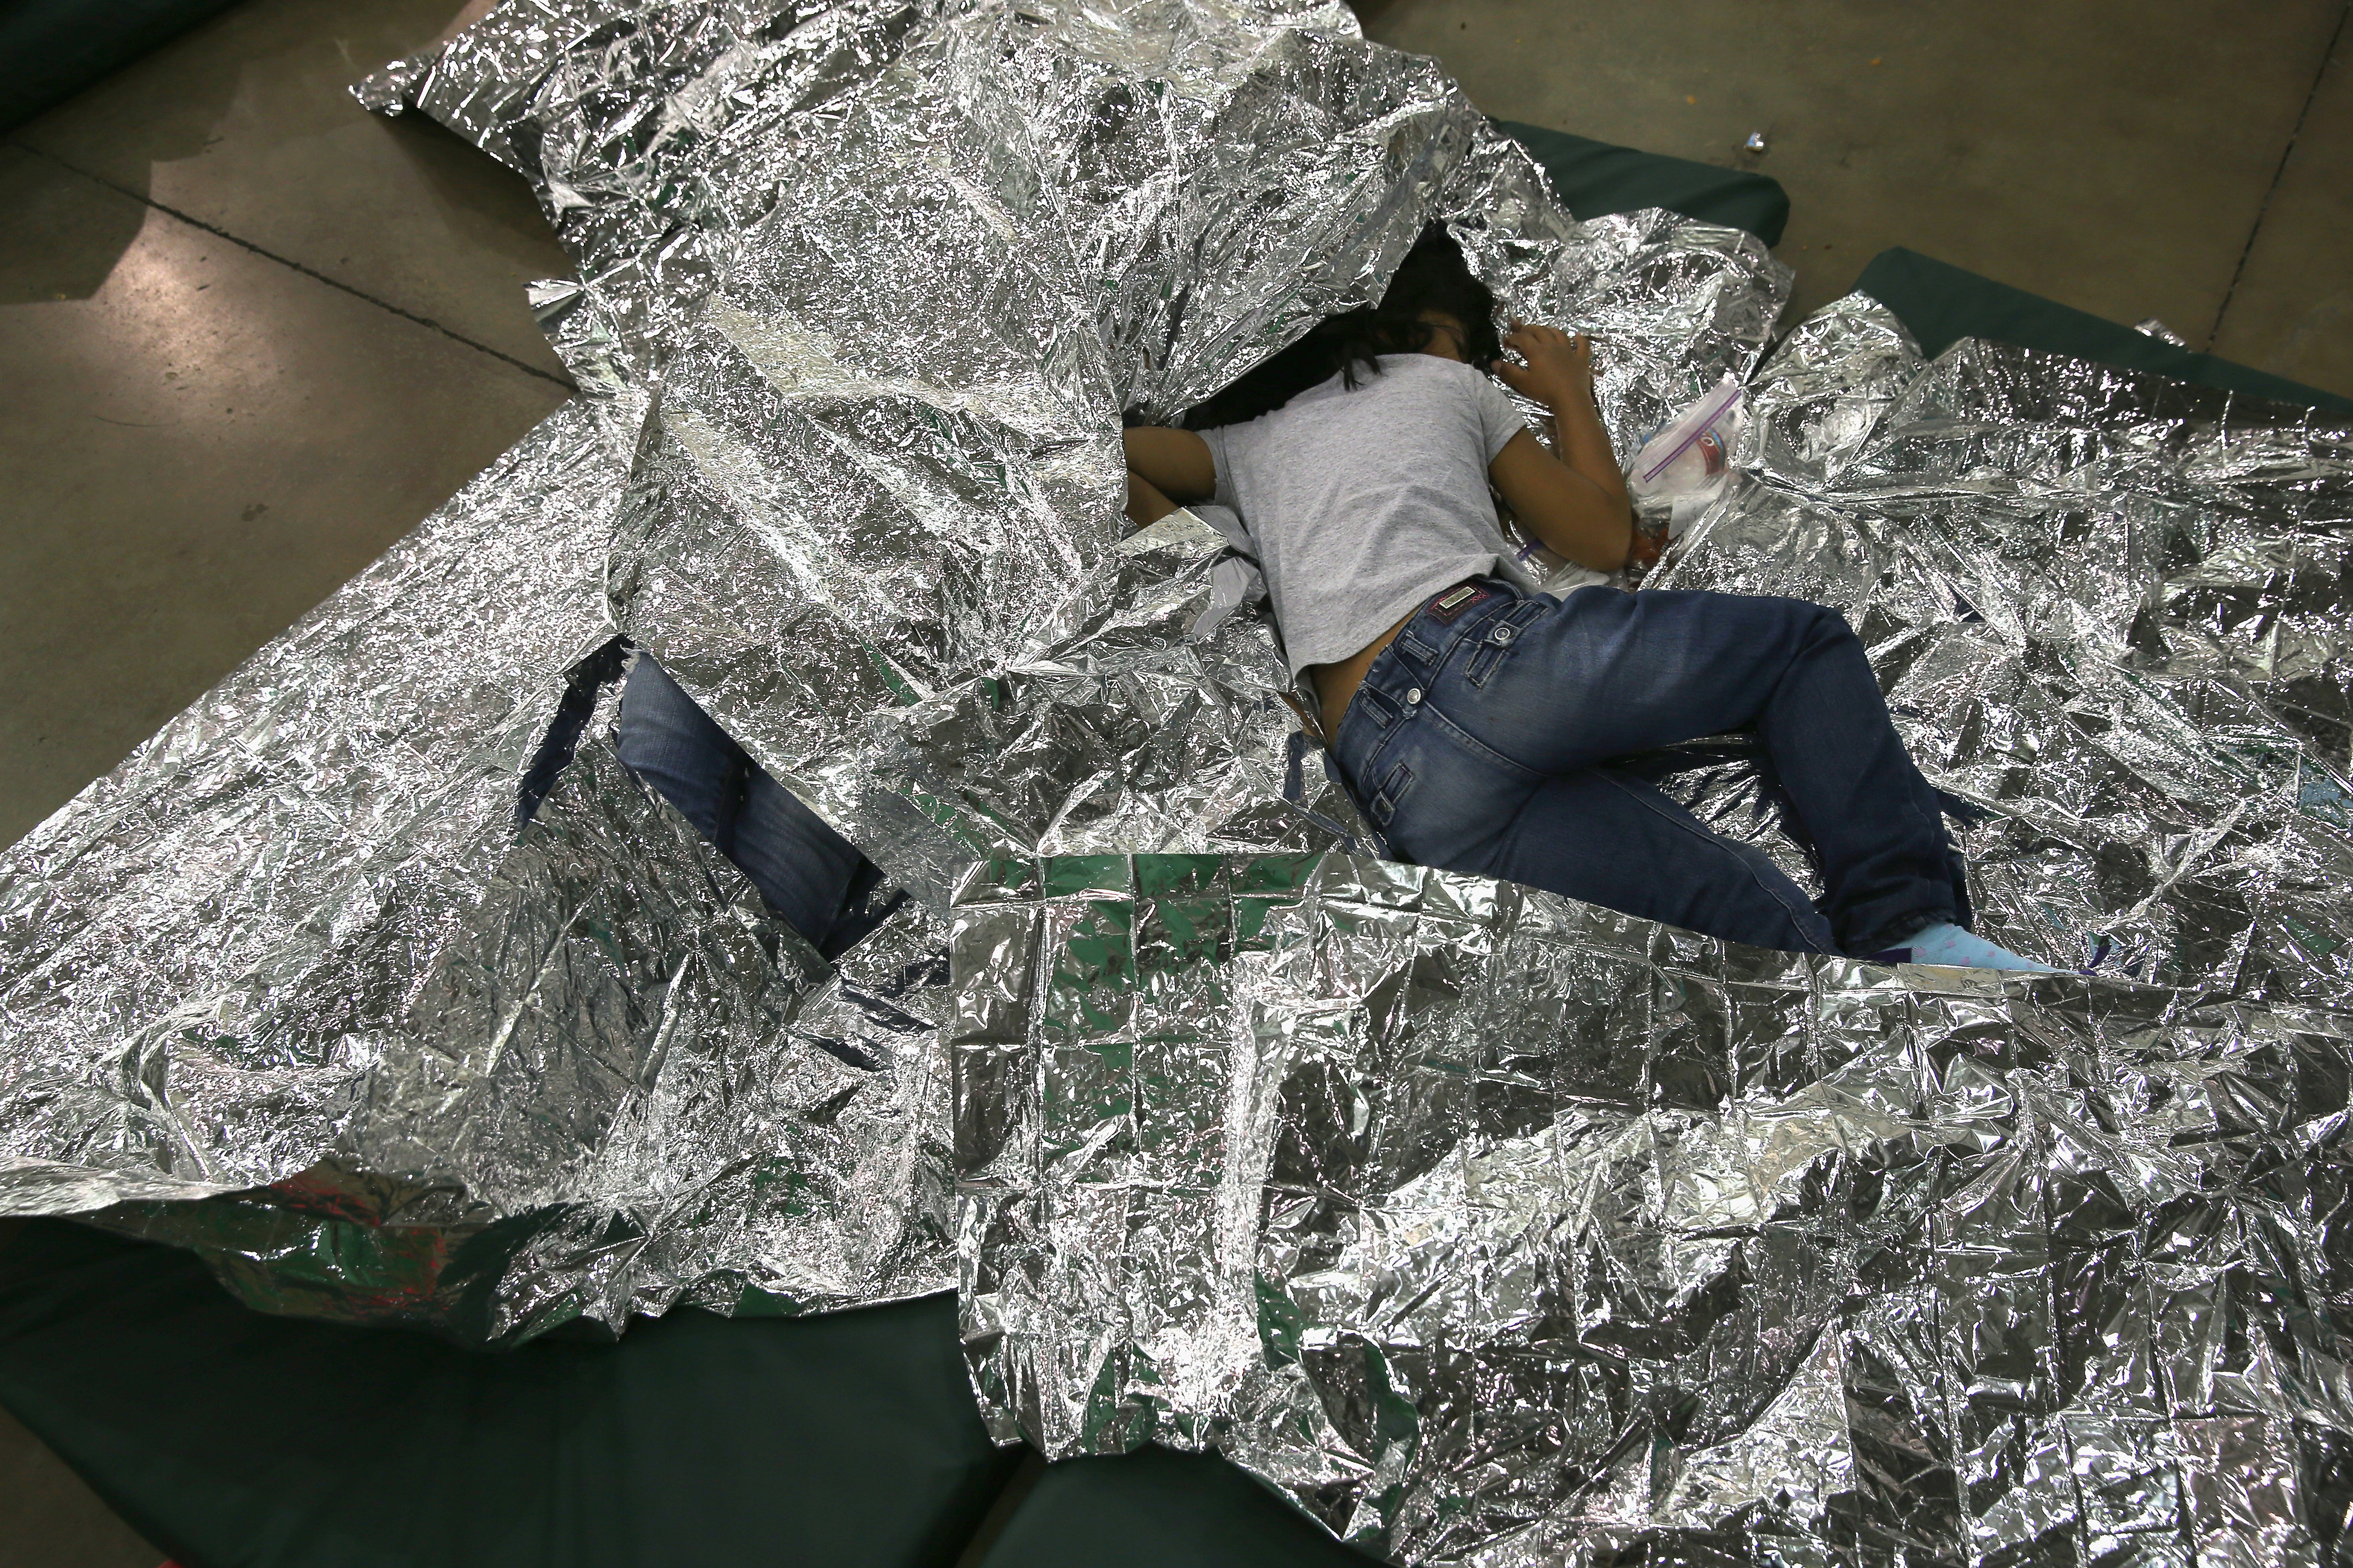 A girl from Central America rests on thermal blankets at a detention facility run by the U.S. Border Patro in McAllen, Texasl on Sept. 8, 2014. (John Moore—Getty Images)